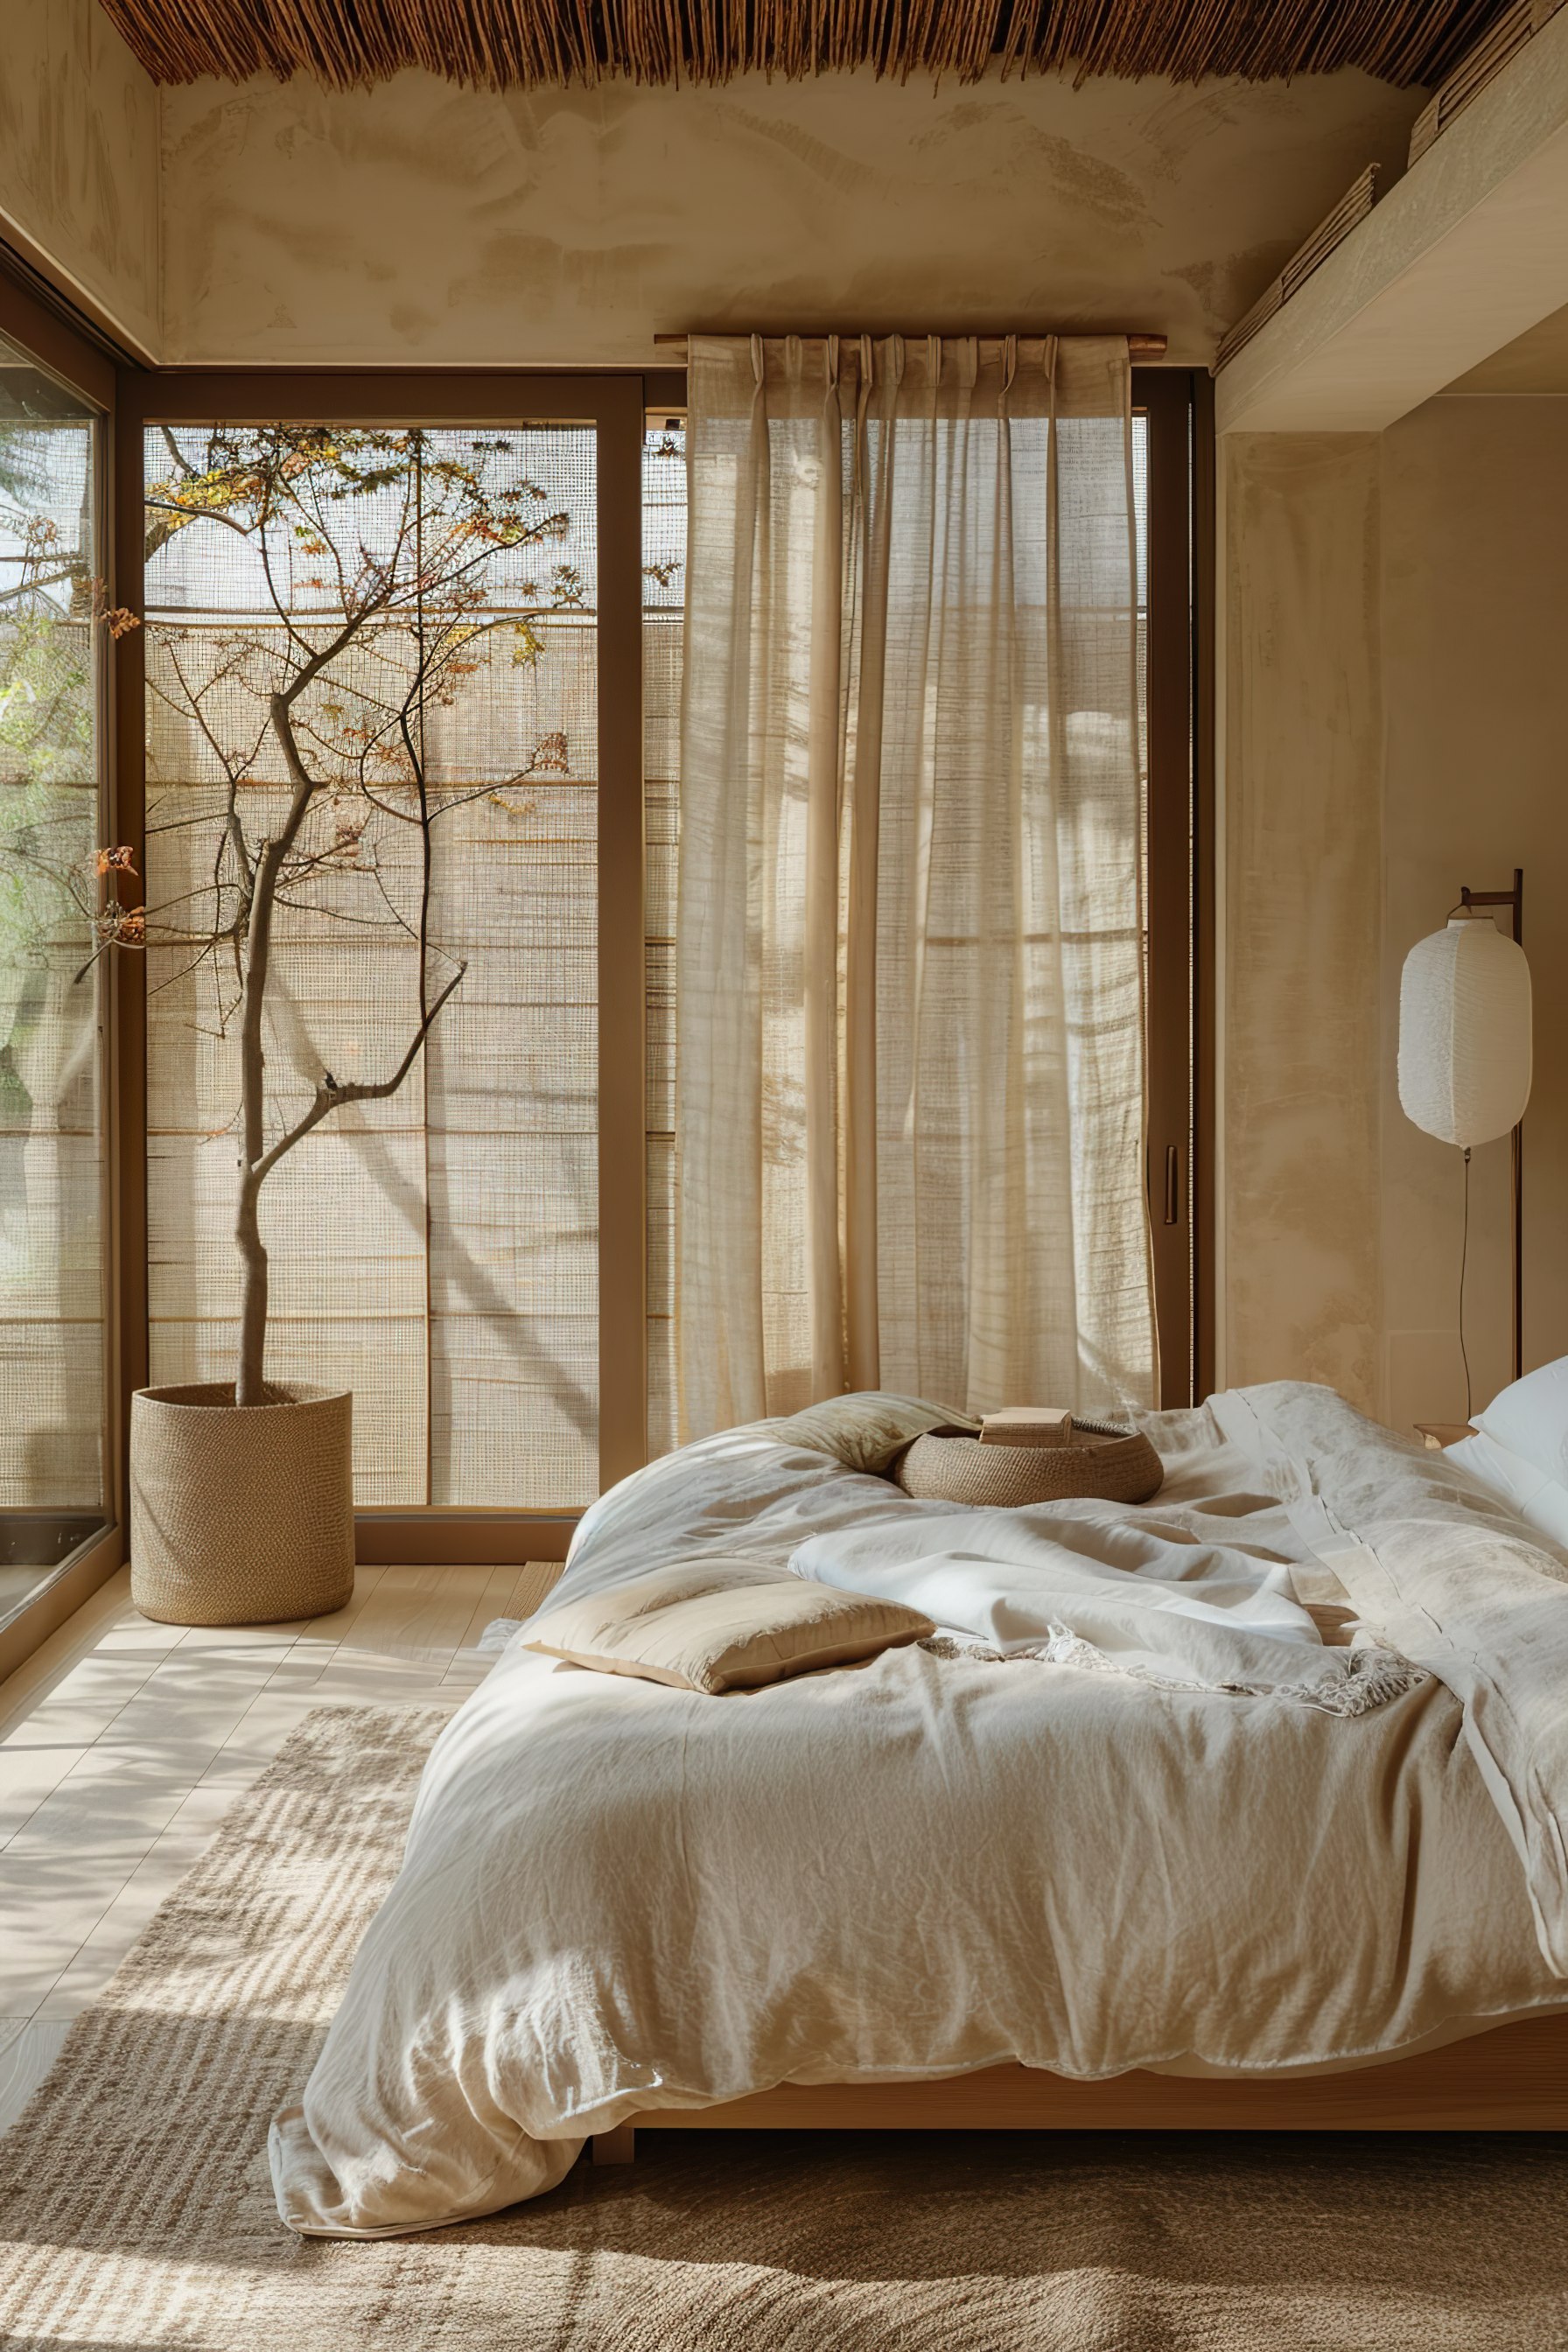 A serene bedroom with a large window, sheer curtains, a bare tree in a basket, and a bed with neutral linens in soft sunlight.